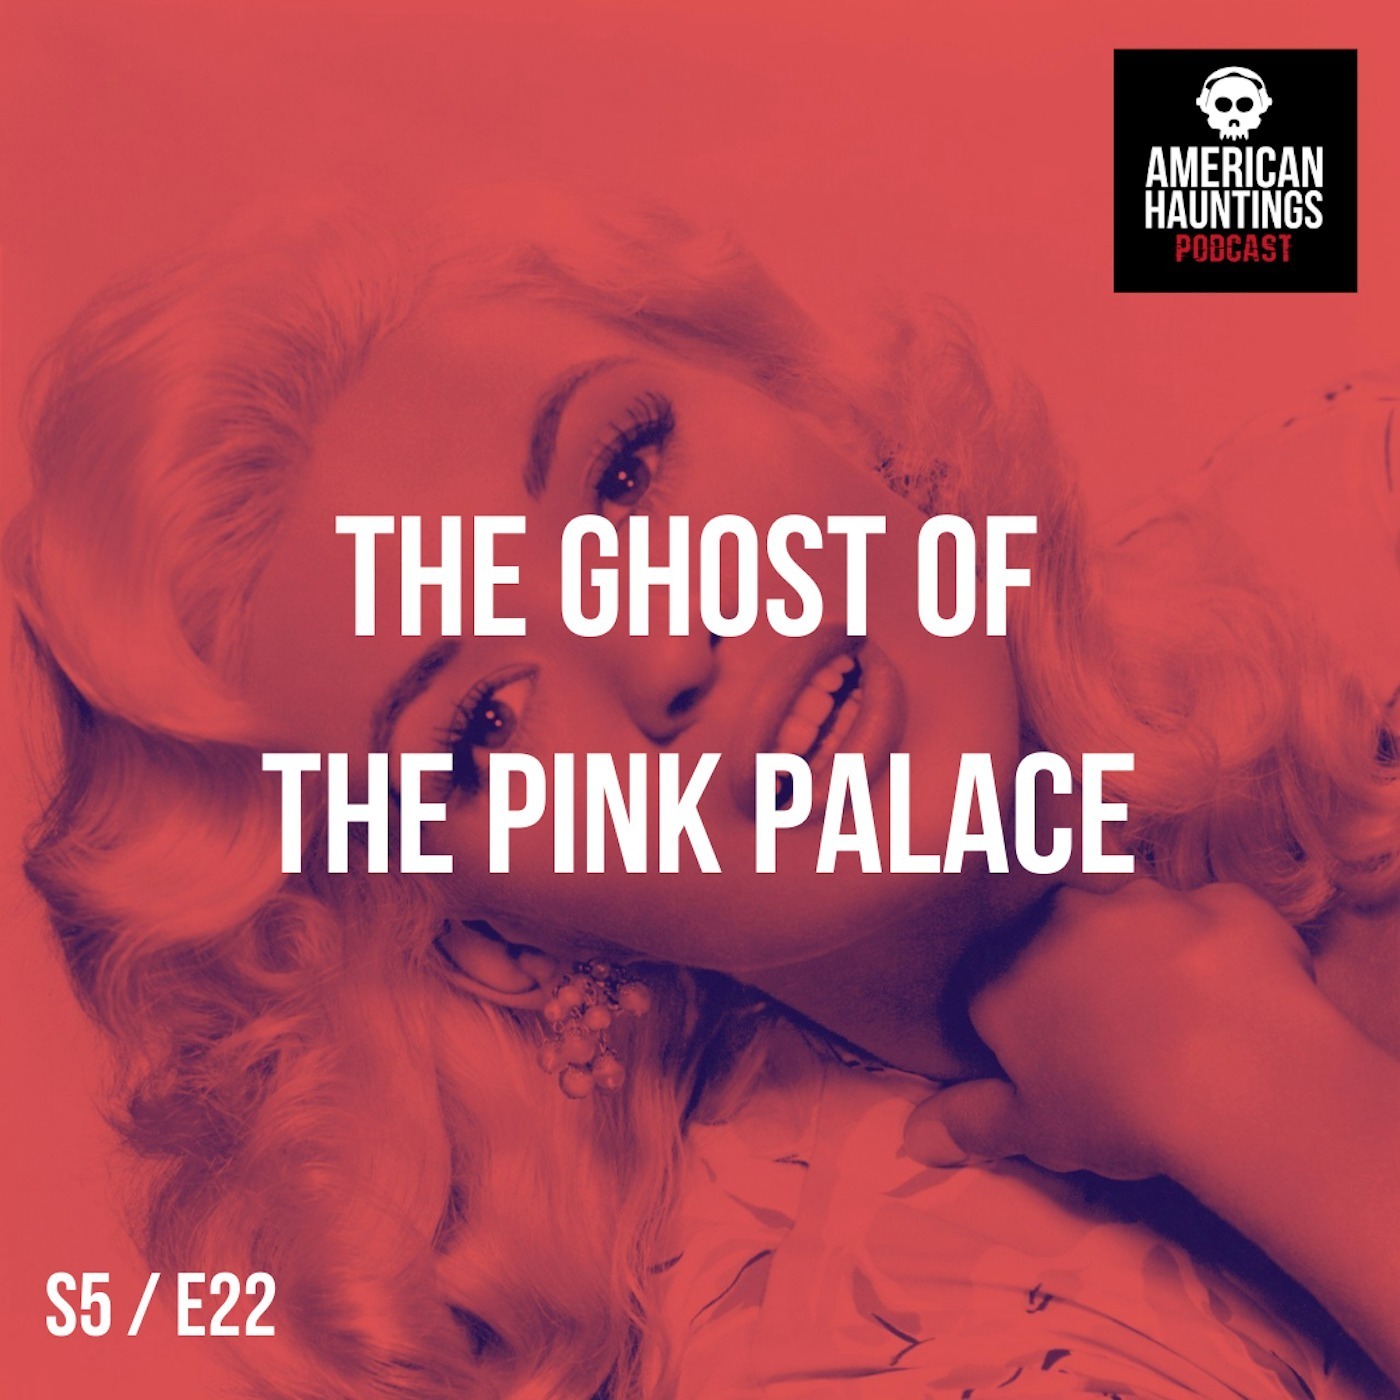 The Ghost Of The Pink Palace: Jayne Mansfield